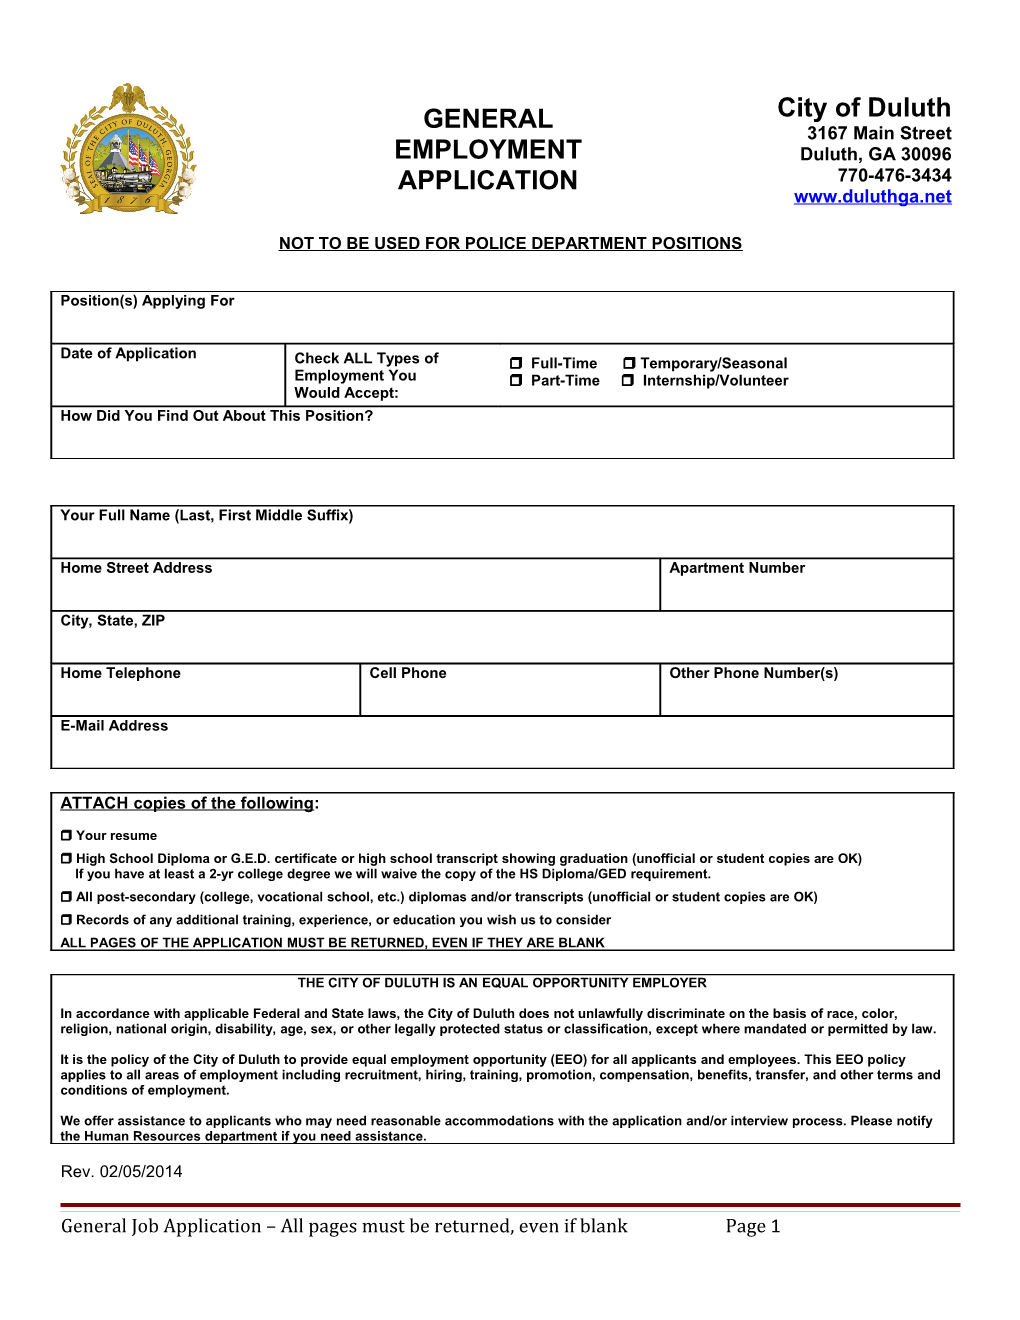 APPLICATION for EMPLOYMENT City of Duluth, GA